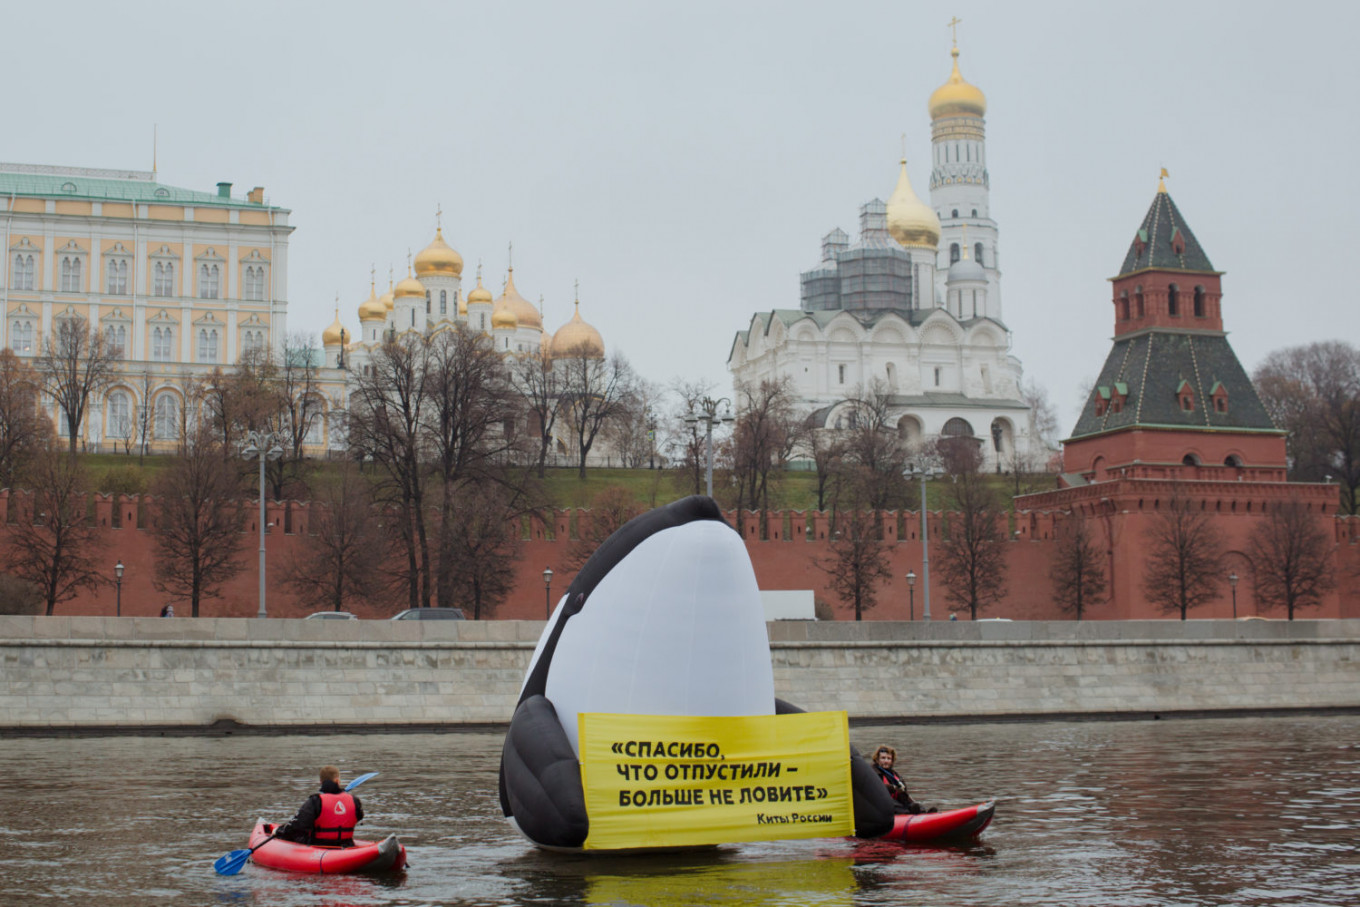 Russian Activists Detained Over Giant Blow-Up Whale Protest Near Kremlin